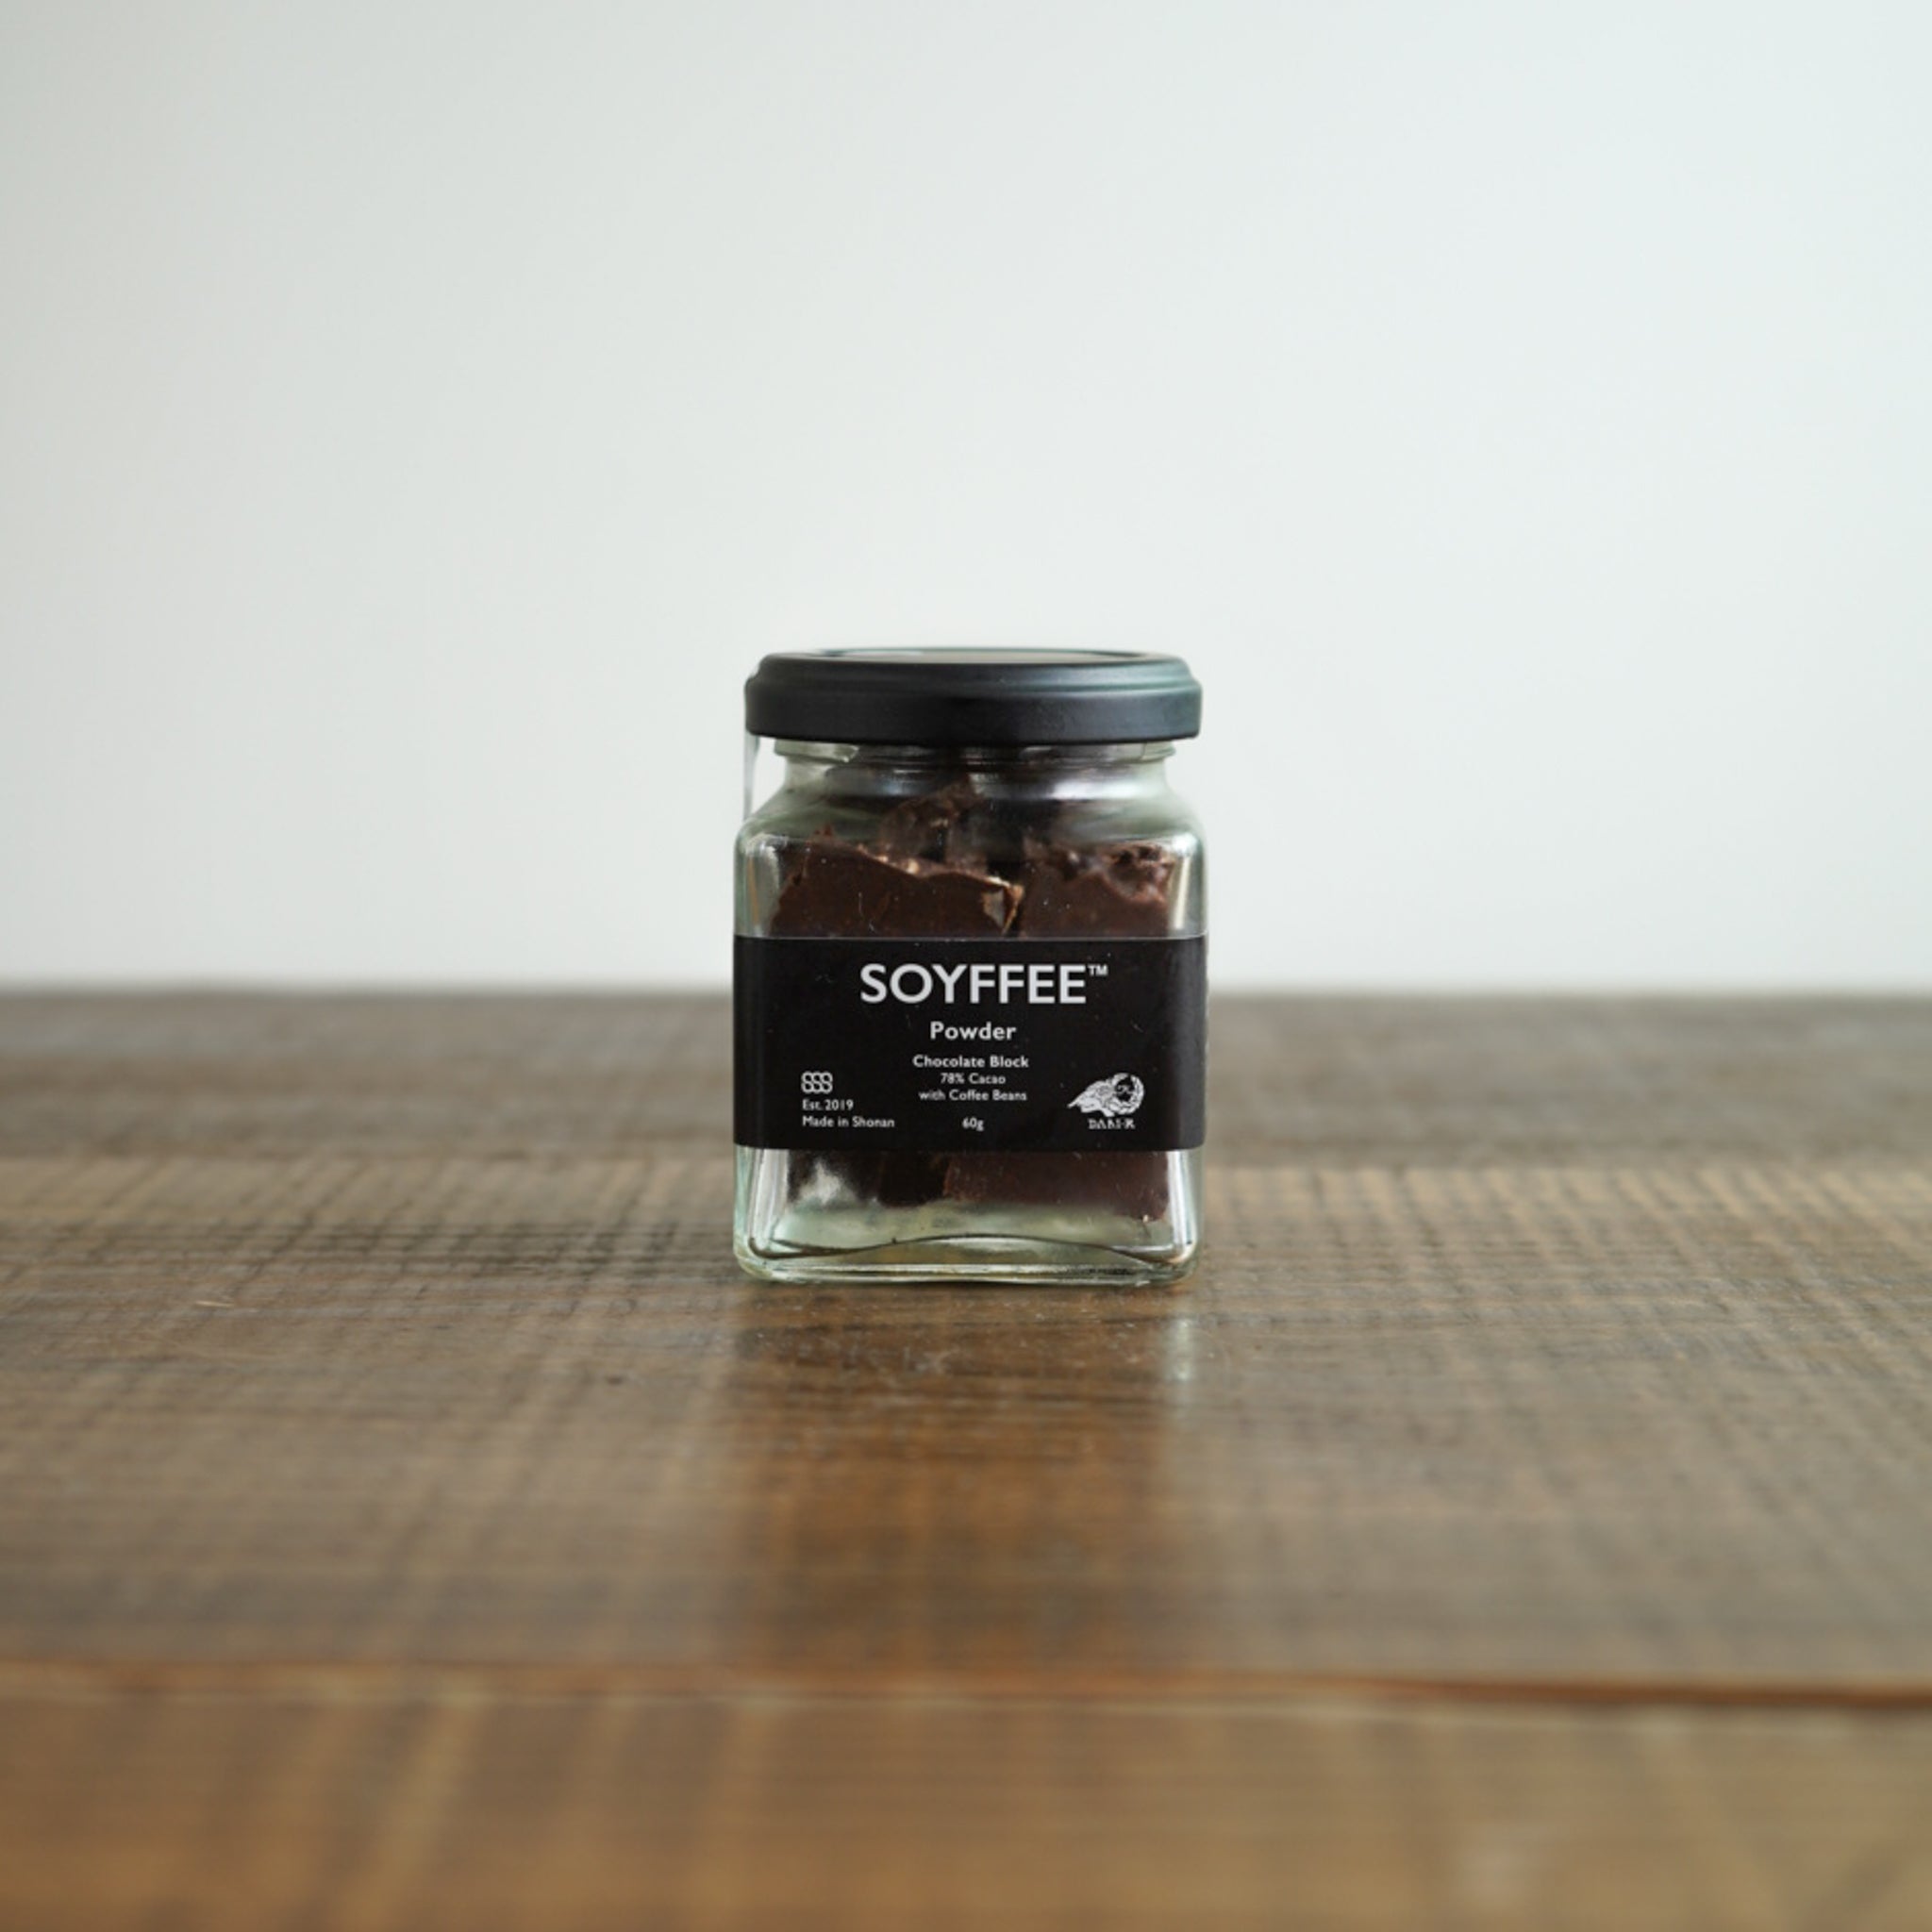 SOYFFEE Powder Chocolate Block with Coffee Beans<<60g>> x 1 ソイフィーパウダーチョコレートブロックwithコーヒービーンズ